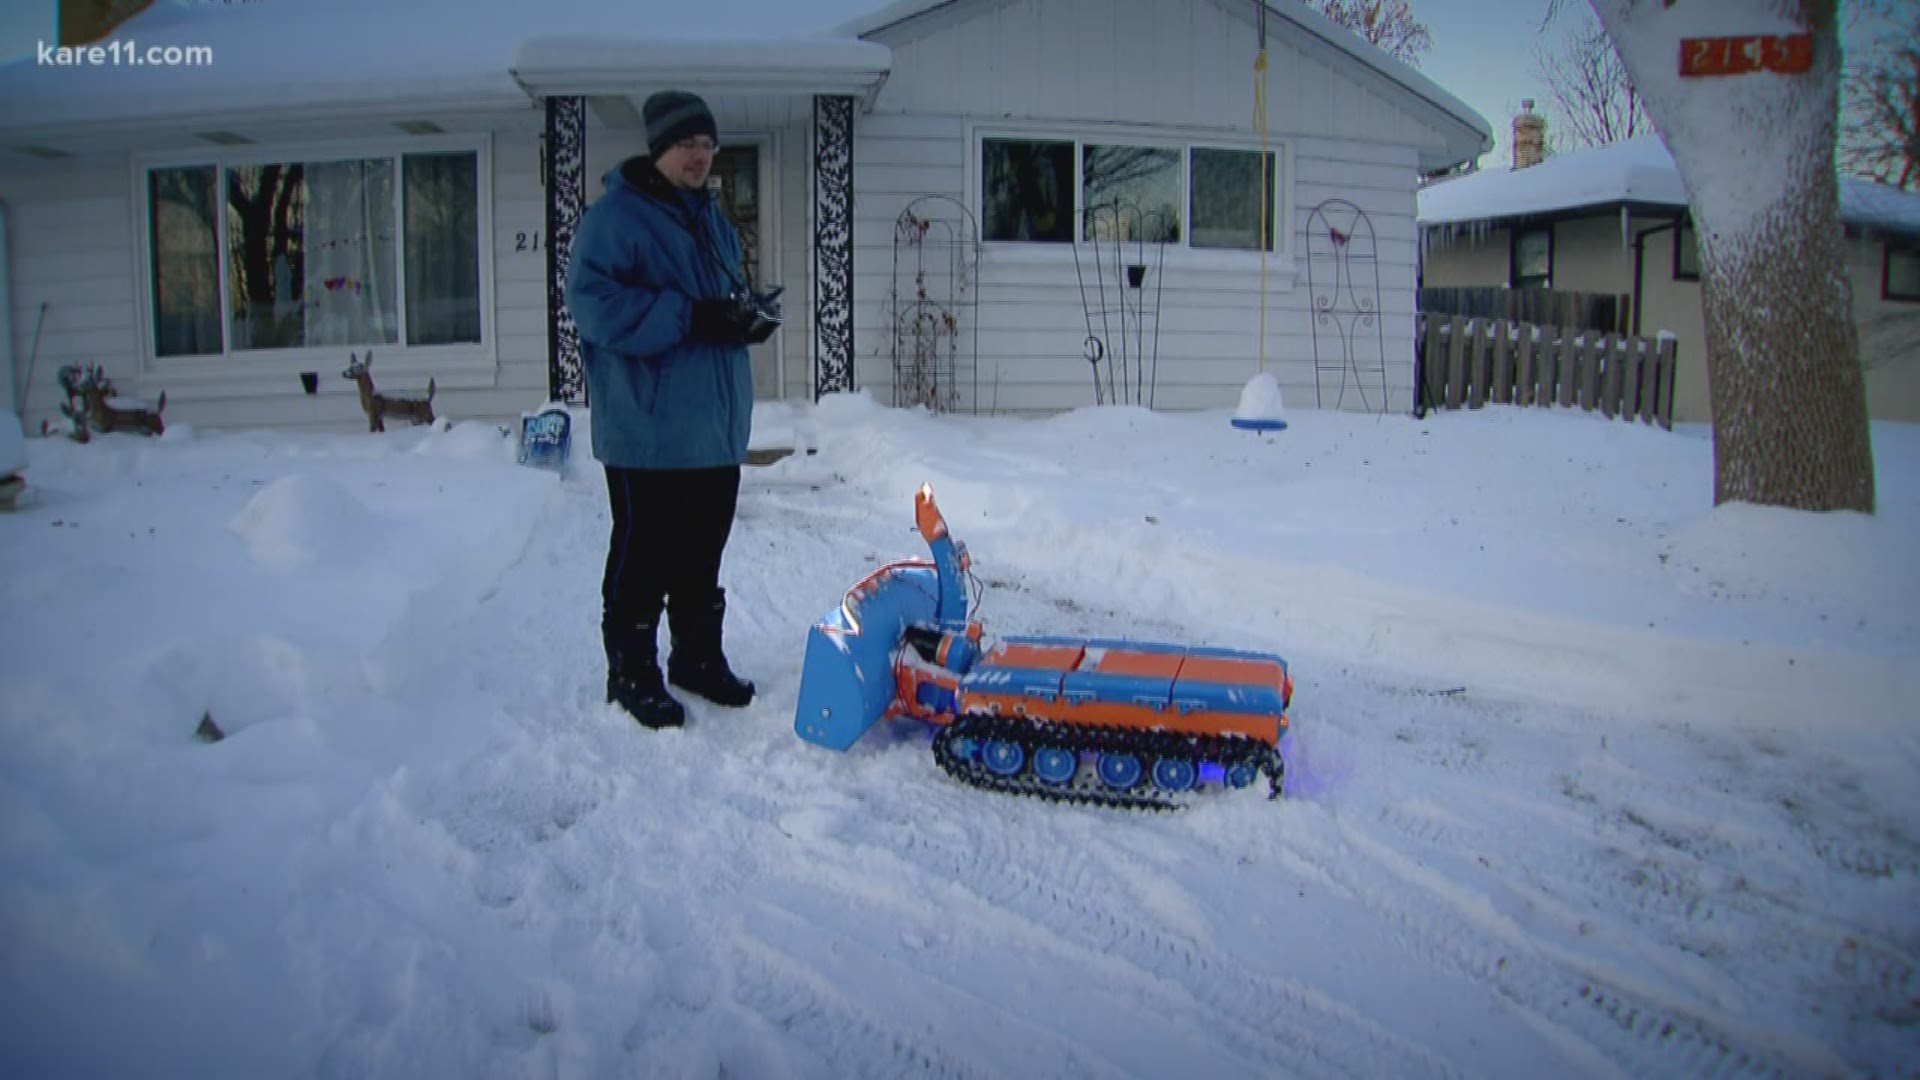 A St. Paul man created something that could revolutionize winter in Minnesota. He 3-D printed snowblowers that are remote-controlled. Photojournalist David Peterlinz show us the amazing inventions.